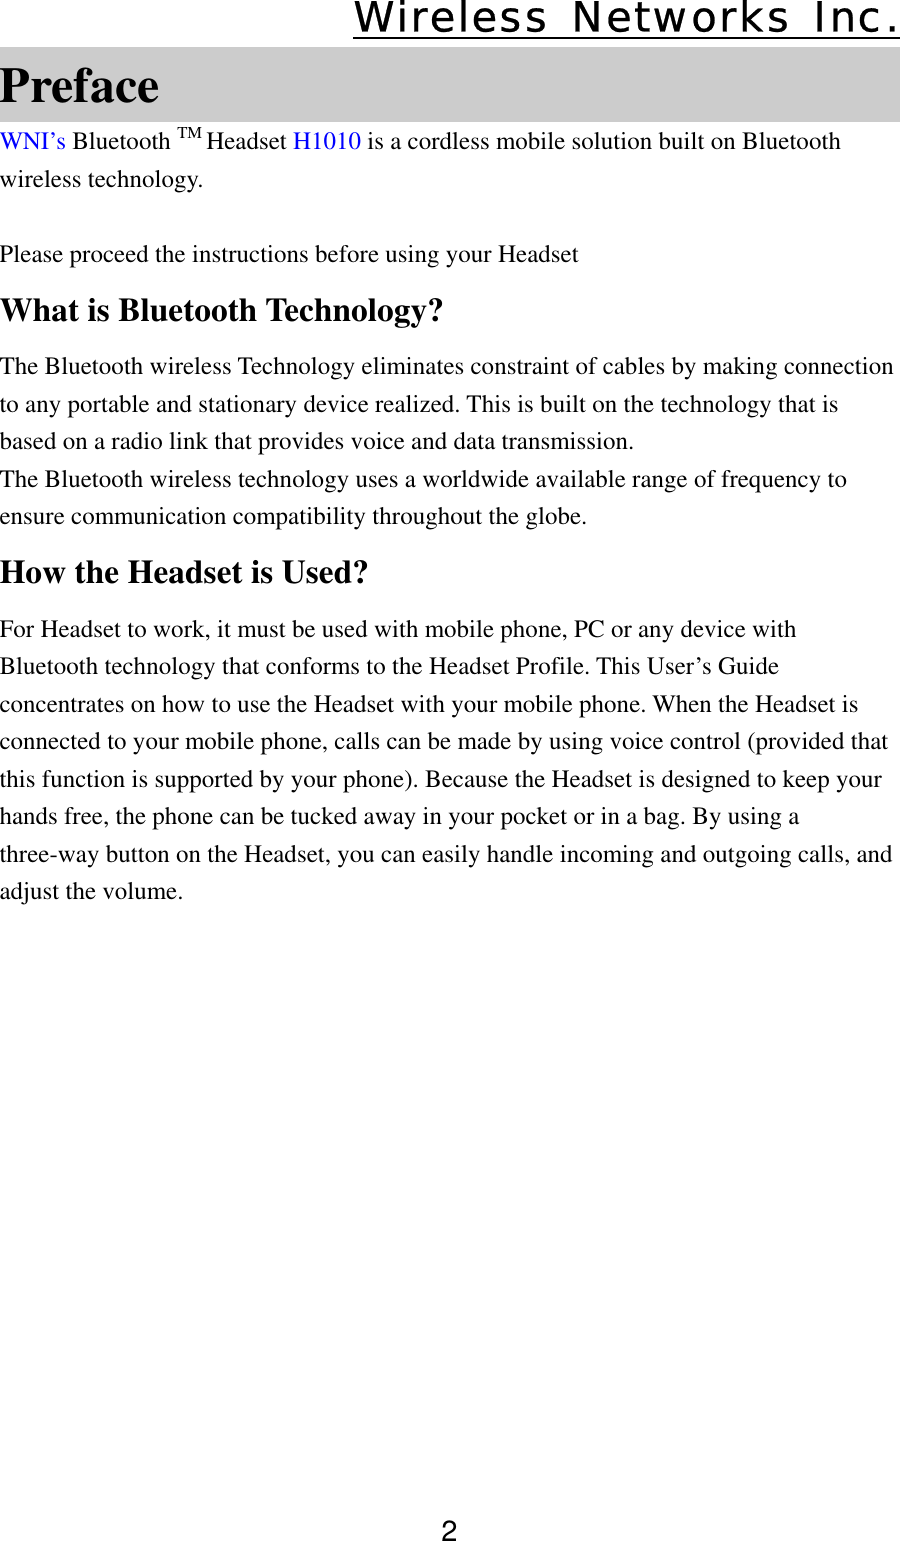 Wireless Networks Inc. 2 Preface WNI’s Bluetooth TM Headset H1010 is a cordless mobile solution built on Bluetooth wireless technology.  Please proceed the instructions before using your Headset What is Bluetooth Technology? The Bluetooth wireless Technology eliminates constraint of cables by making connection to any portable and stationary device realized. This is built on the technology that is based on a radio link that provides voice and data transmission. The Bluetooth wireless technology uses a worldwide available range of frequency to ensure communication compatibility throughout the globe. How the Headset is Used?   For Headset to work, it must be used with mobile phone, PC or any device with Bluetooth technology that conforms to the Headset Profile. This User’s Guide concentrates on how to use the Headset with your mobile phone. When the Headset is connected to your mobile phone, calls can be made by using voice control (provided that this function is supported by your phone). Because the Headset is designed to keep your hands free, the phone can be tucked away in your pocket or in a bag. By using a three-way button on the Headset, you can easily handle incoming and outgoing calls, and adjust the volume.                